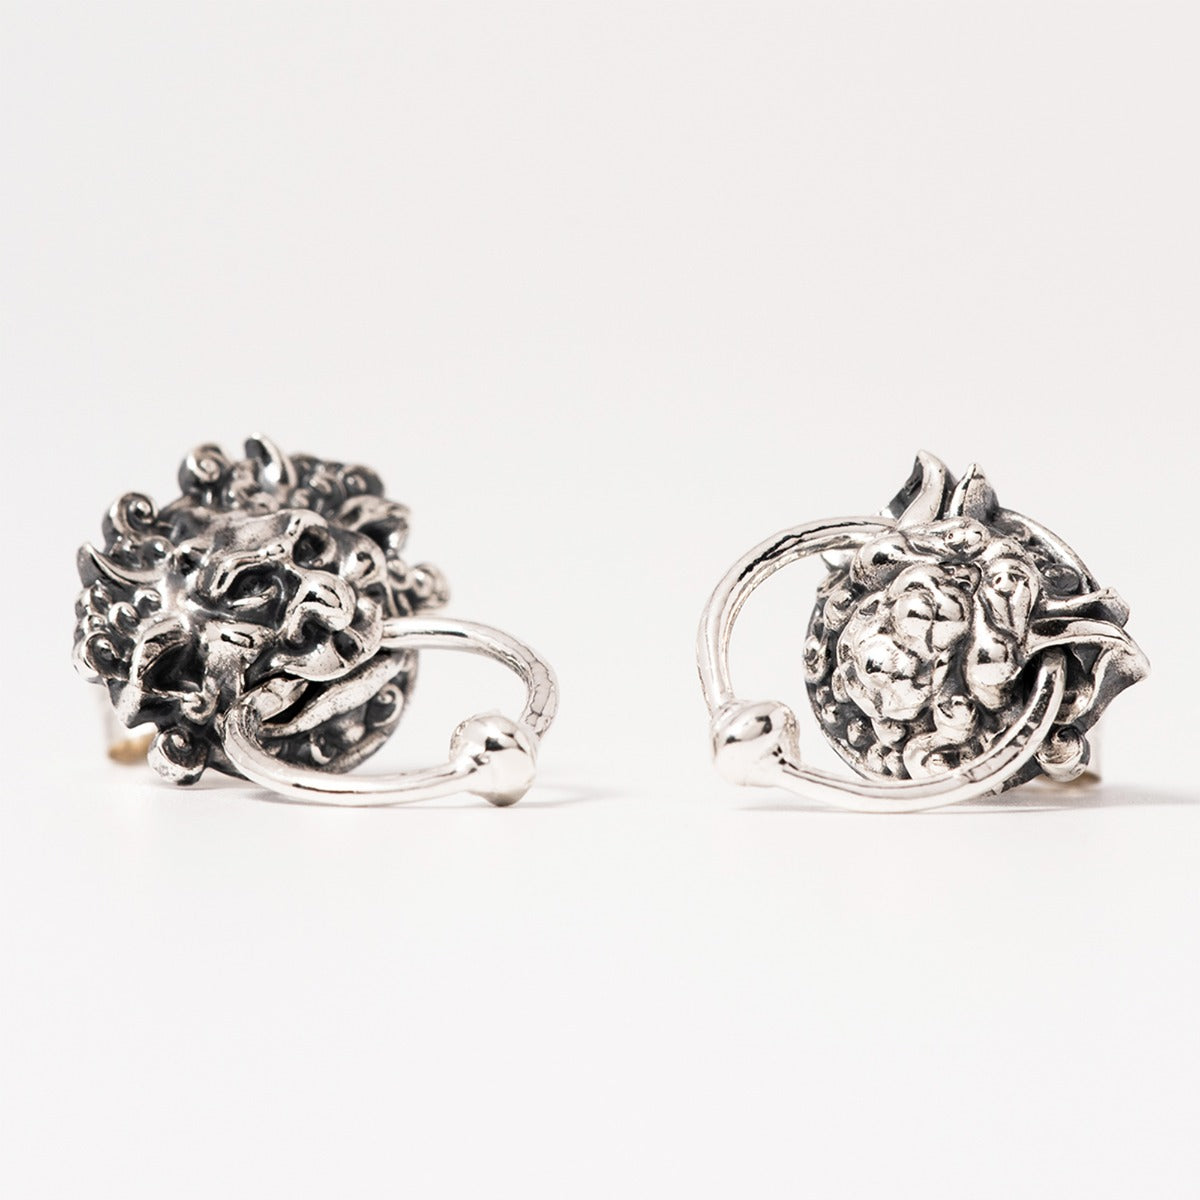 Labyrinth Movie Silver Door Knocker Earrings | Licensed To Charm